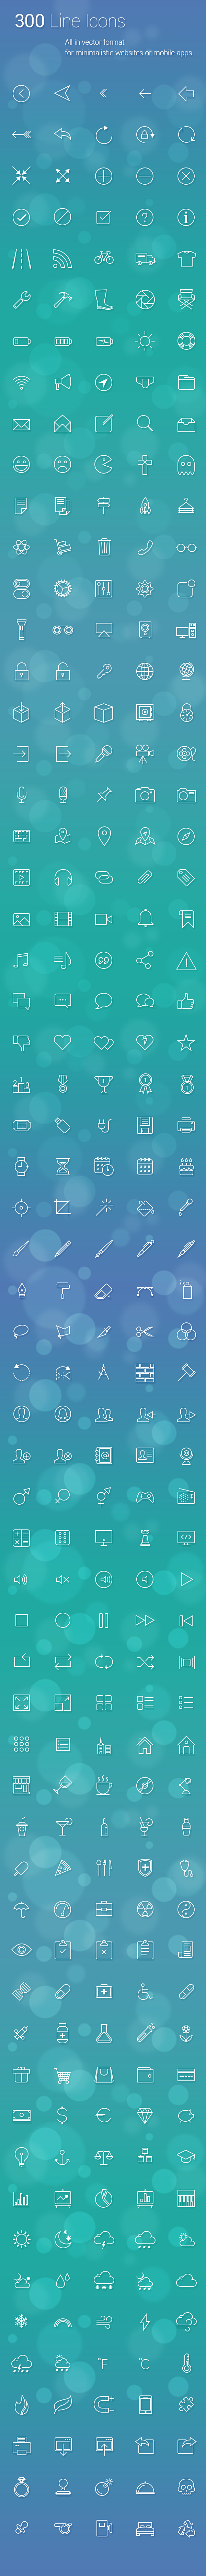 300 Line Icons : Get...